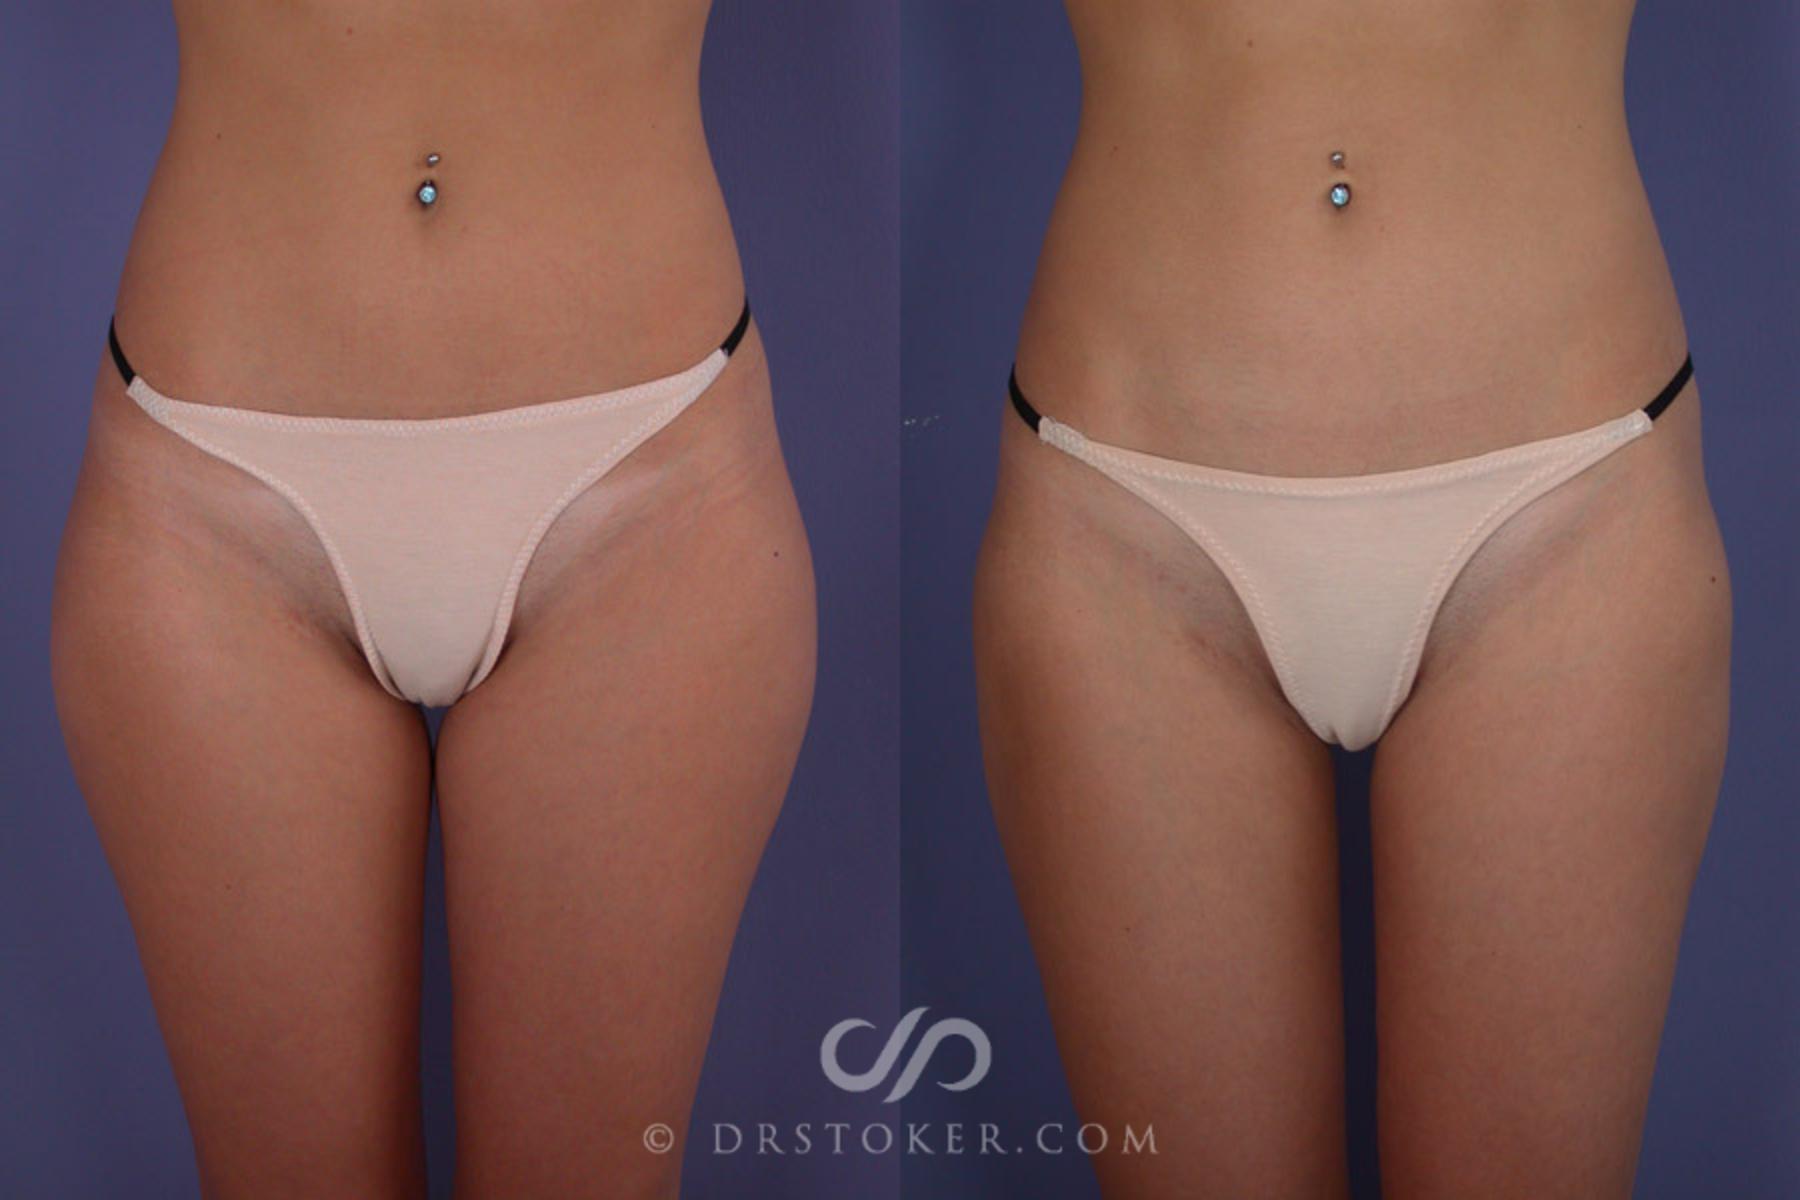 Plastic Surgery Case Study - Pubic Lift with Liposuction for Mons